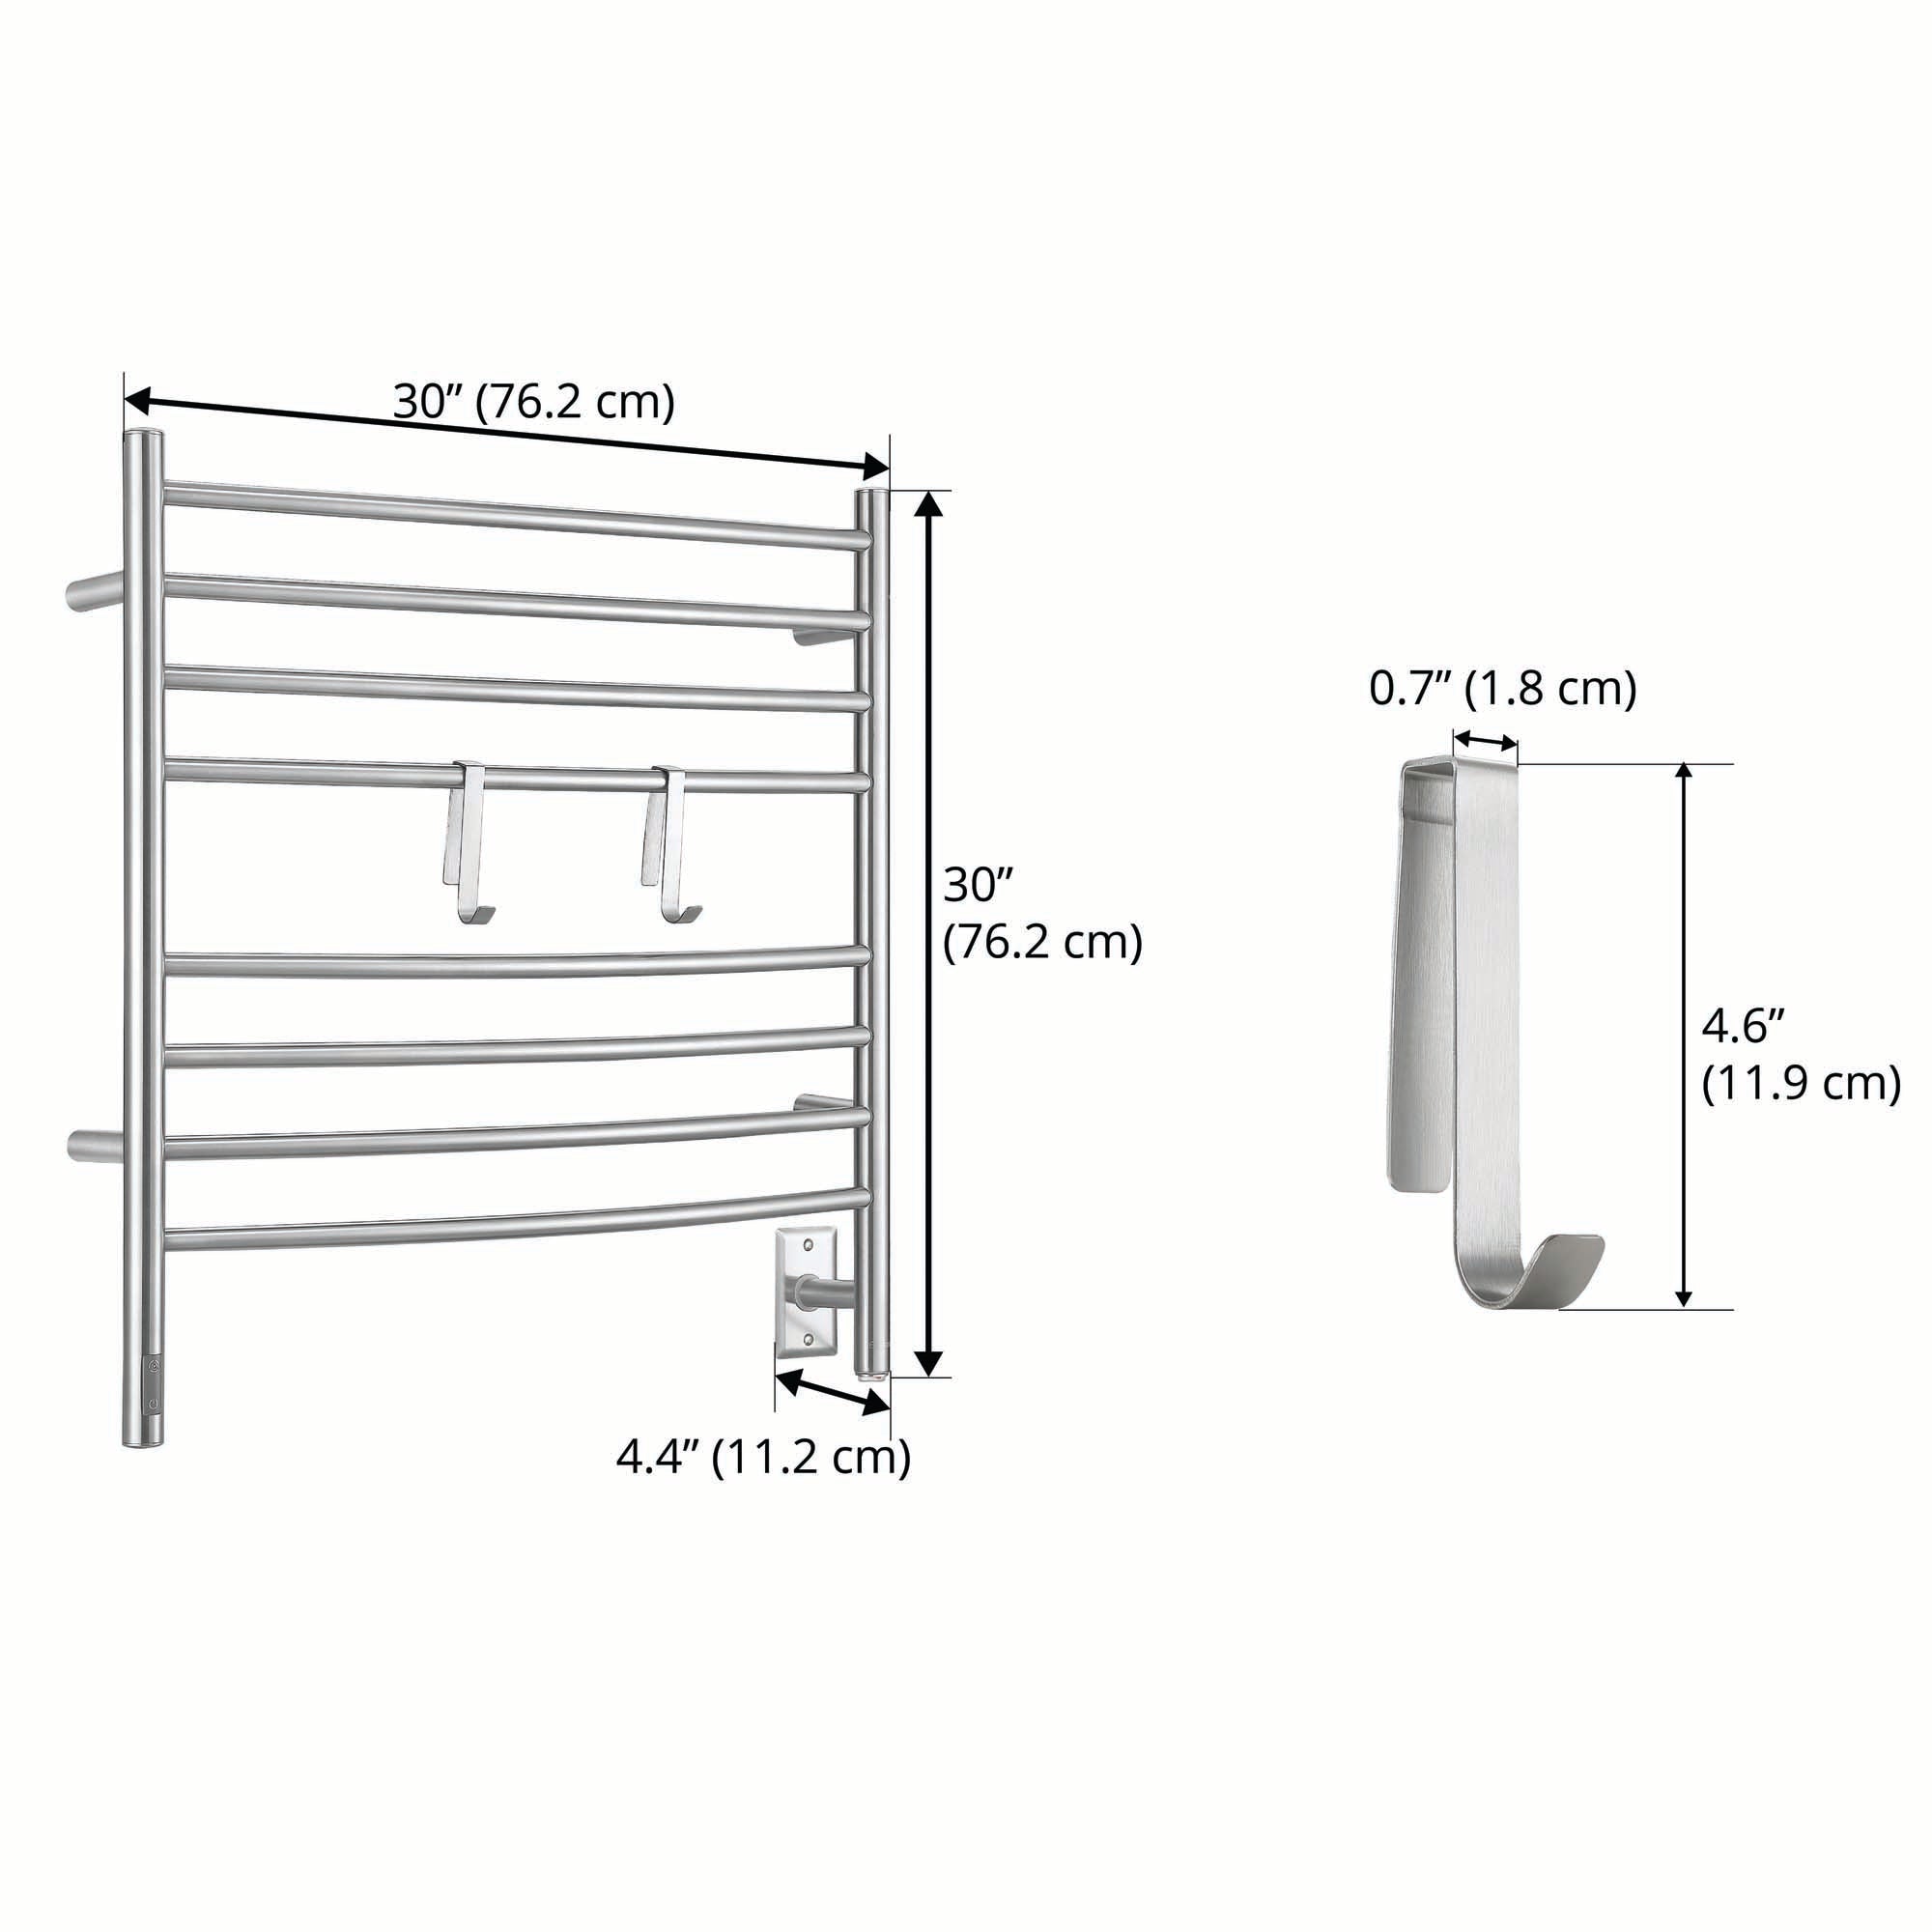 Arezzo OBT 8 Bar Hardwired and Plug-in Towel Warmer with 2 Adjustable Hooks and Integrated On-Board Timer in Brushed Stainless Steel